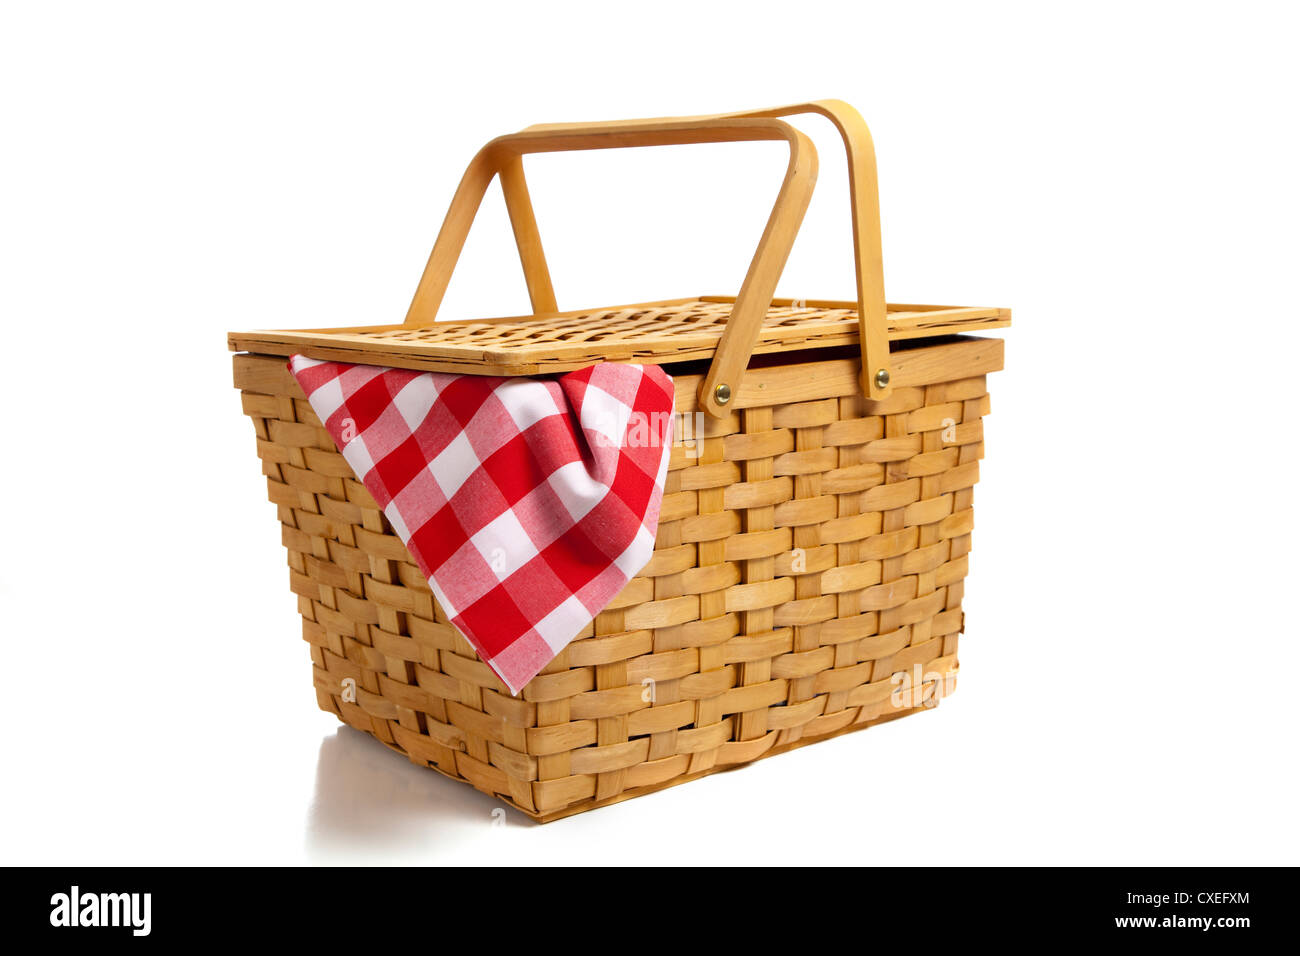 A wicker picnic basket with a red gingham cloth on a white background Stock Photo